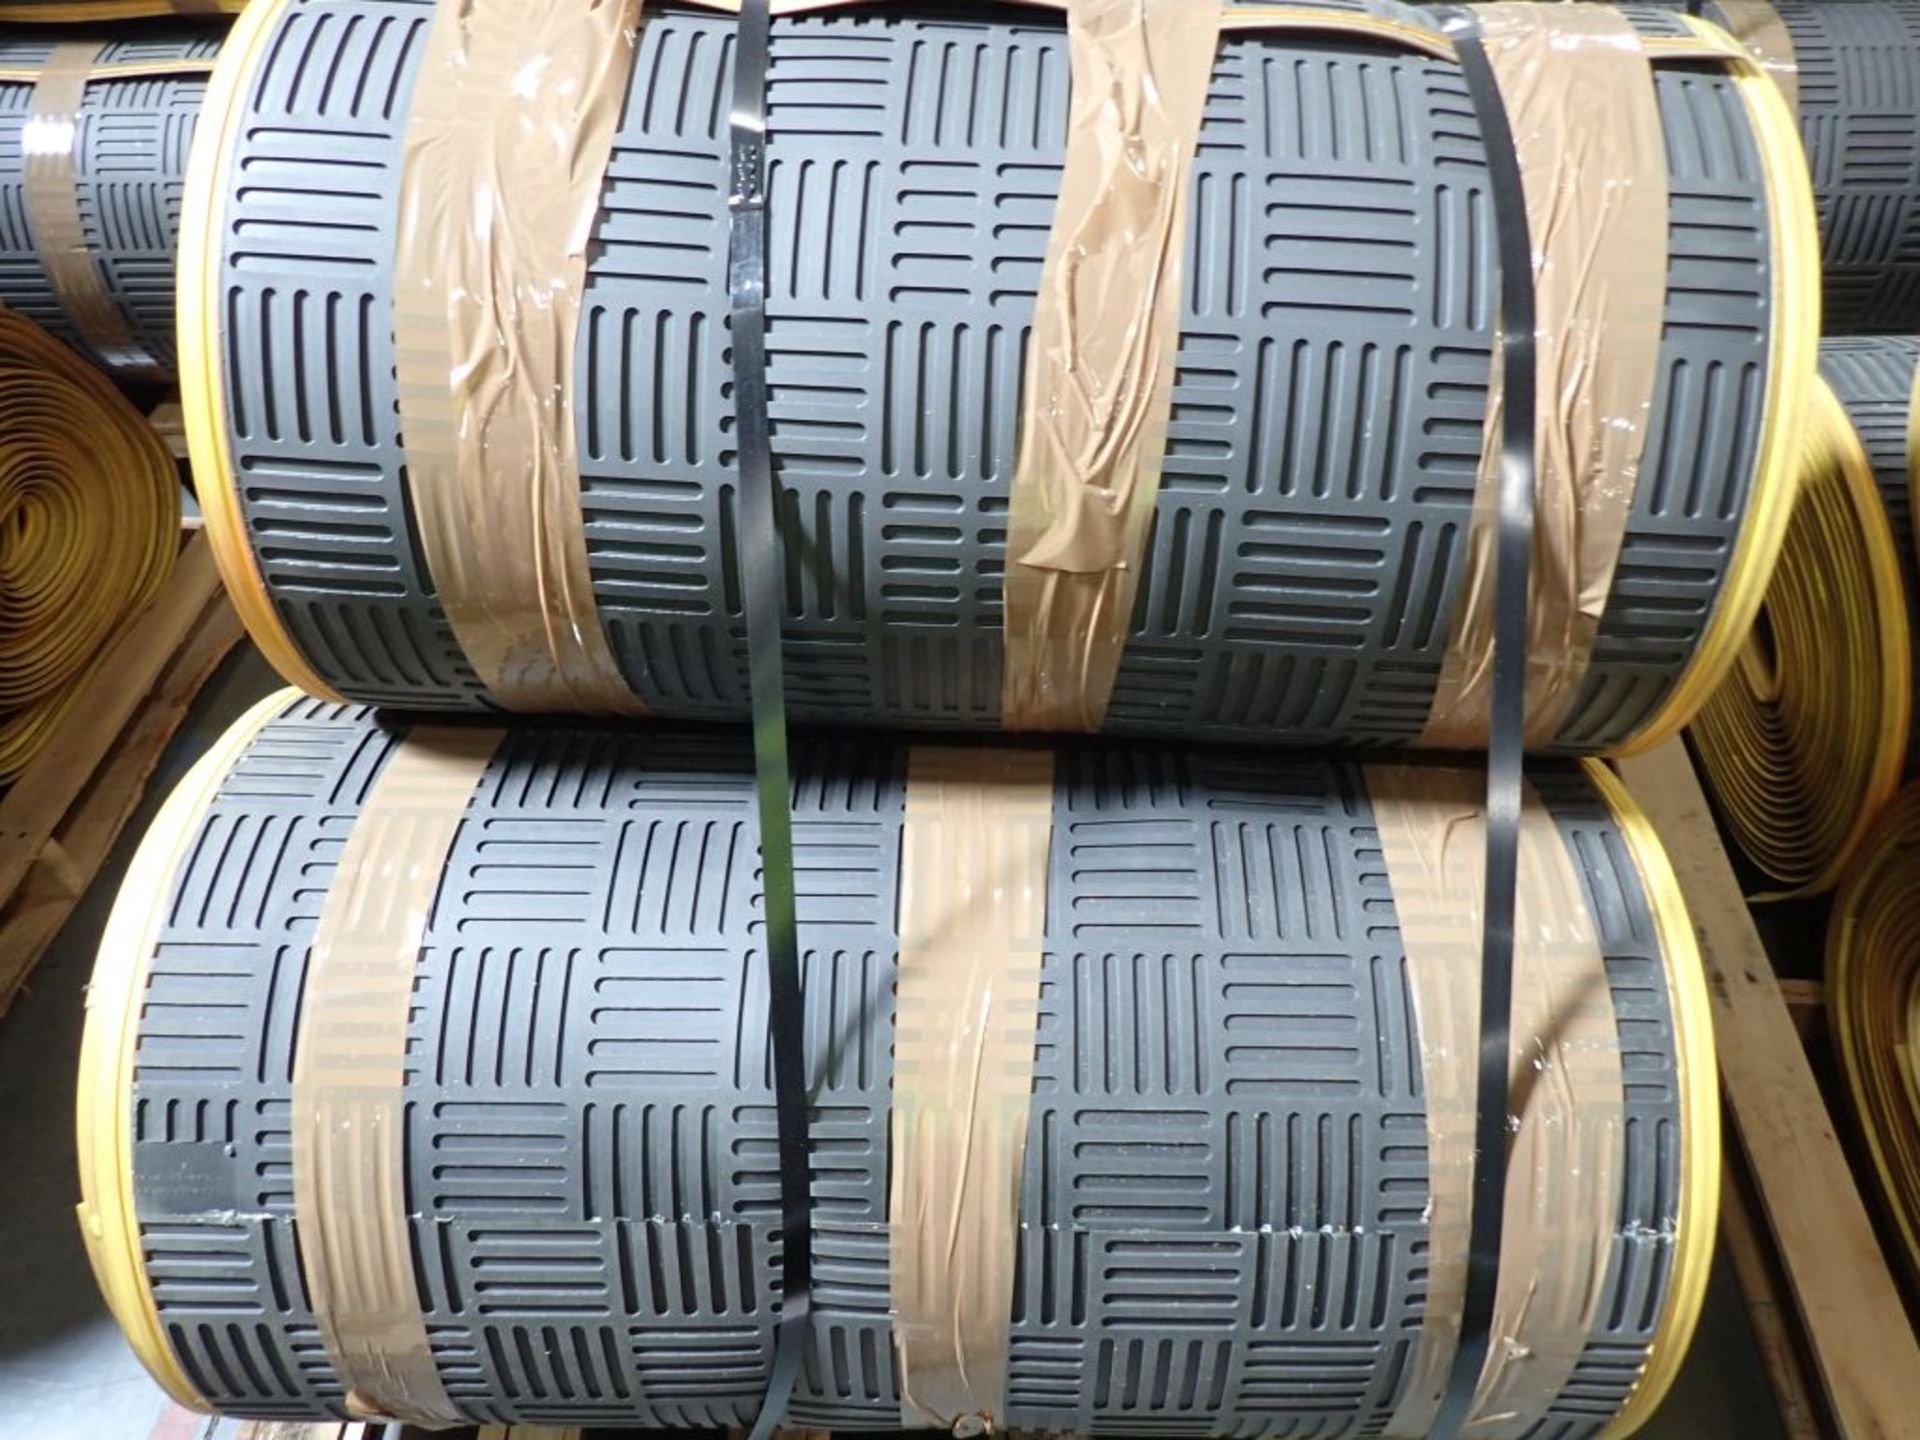 Lot of (3) Rolls of Anti Fatigue 36" Mats - Image 3 of 3